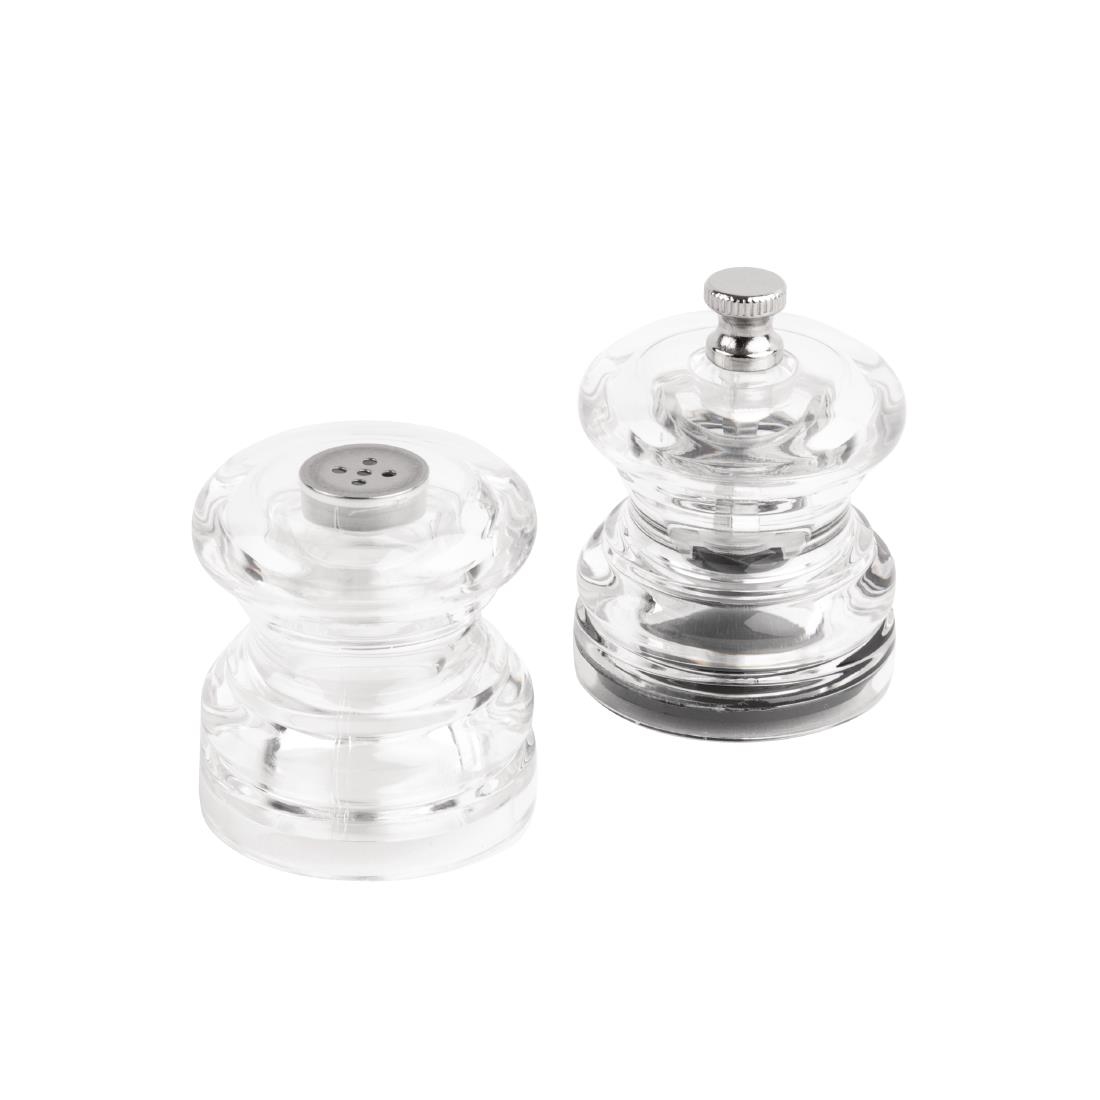 Olympia Miniature Salt and Pepper Set Clear